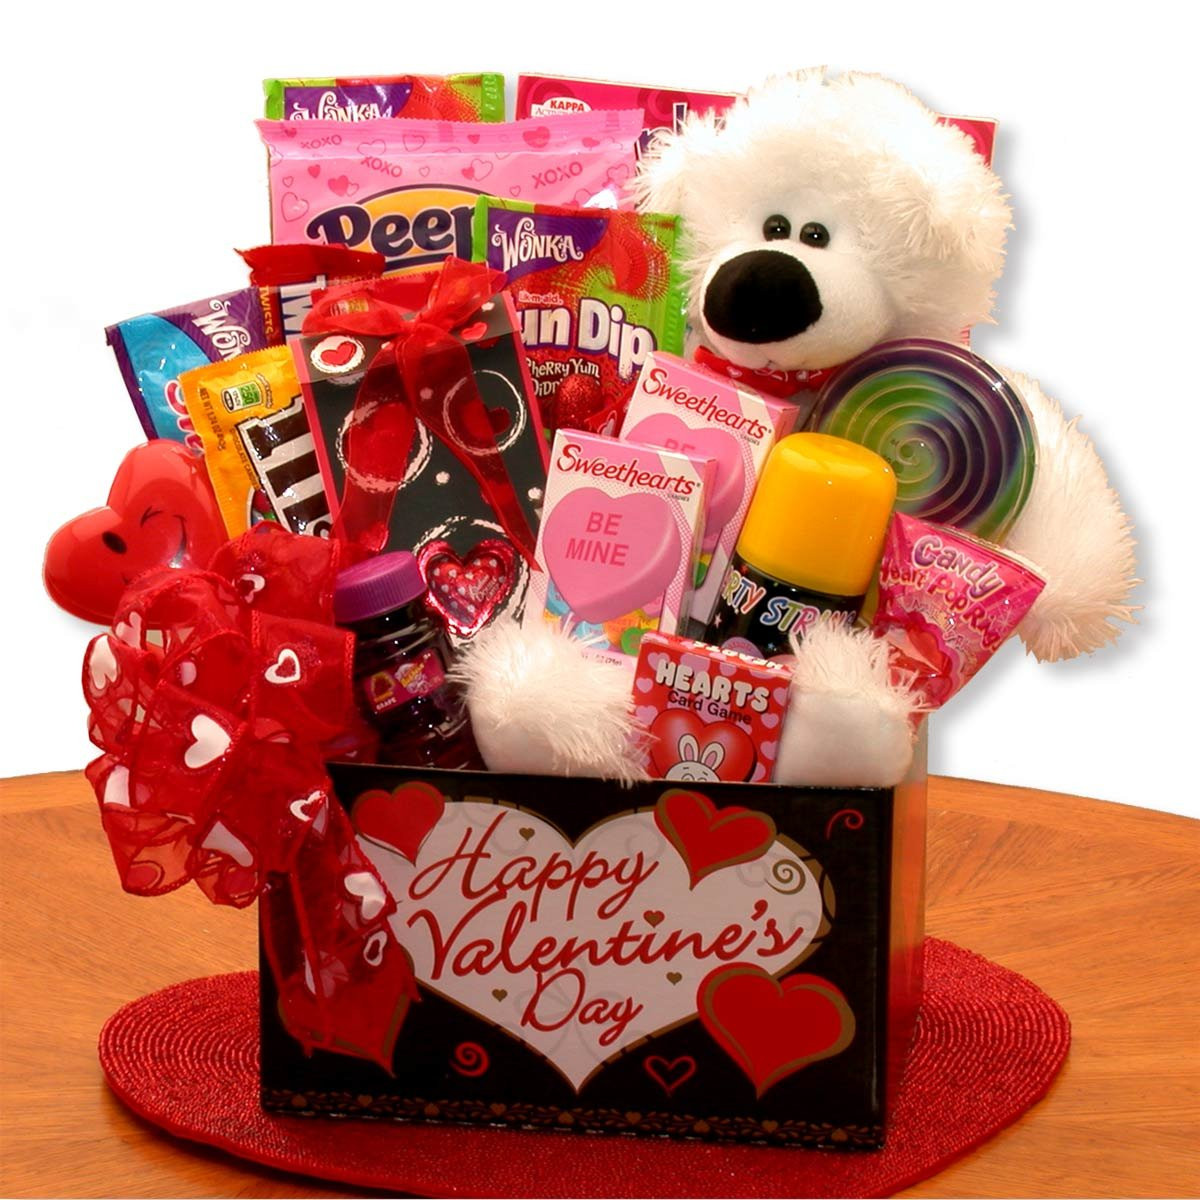 Valentine Gift Ideas For Her Malaysia
 Cute His & Her Valentine Gift Ideas For Your Loved es